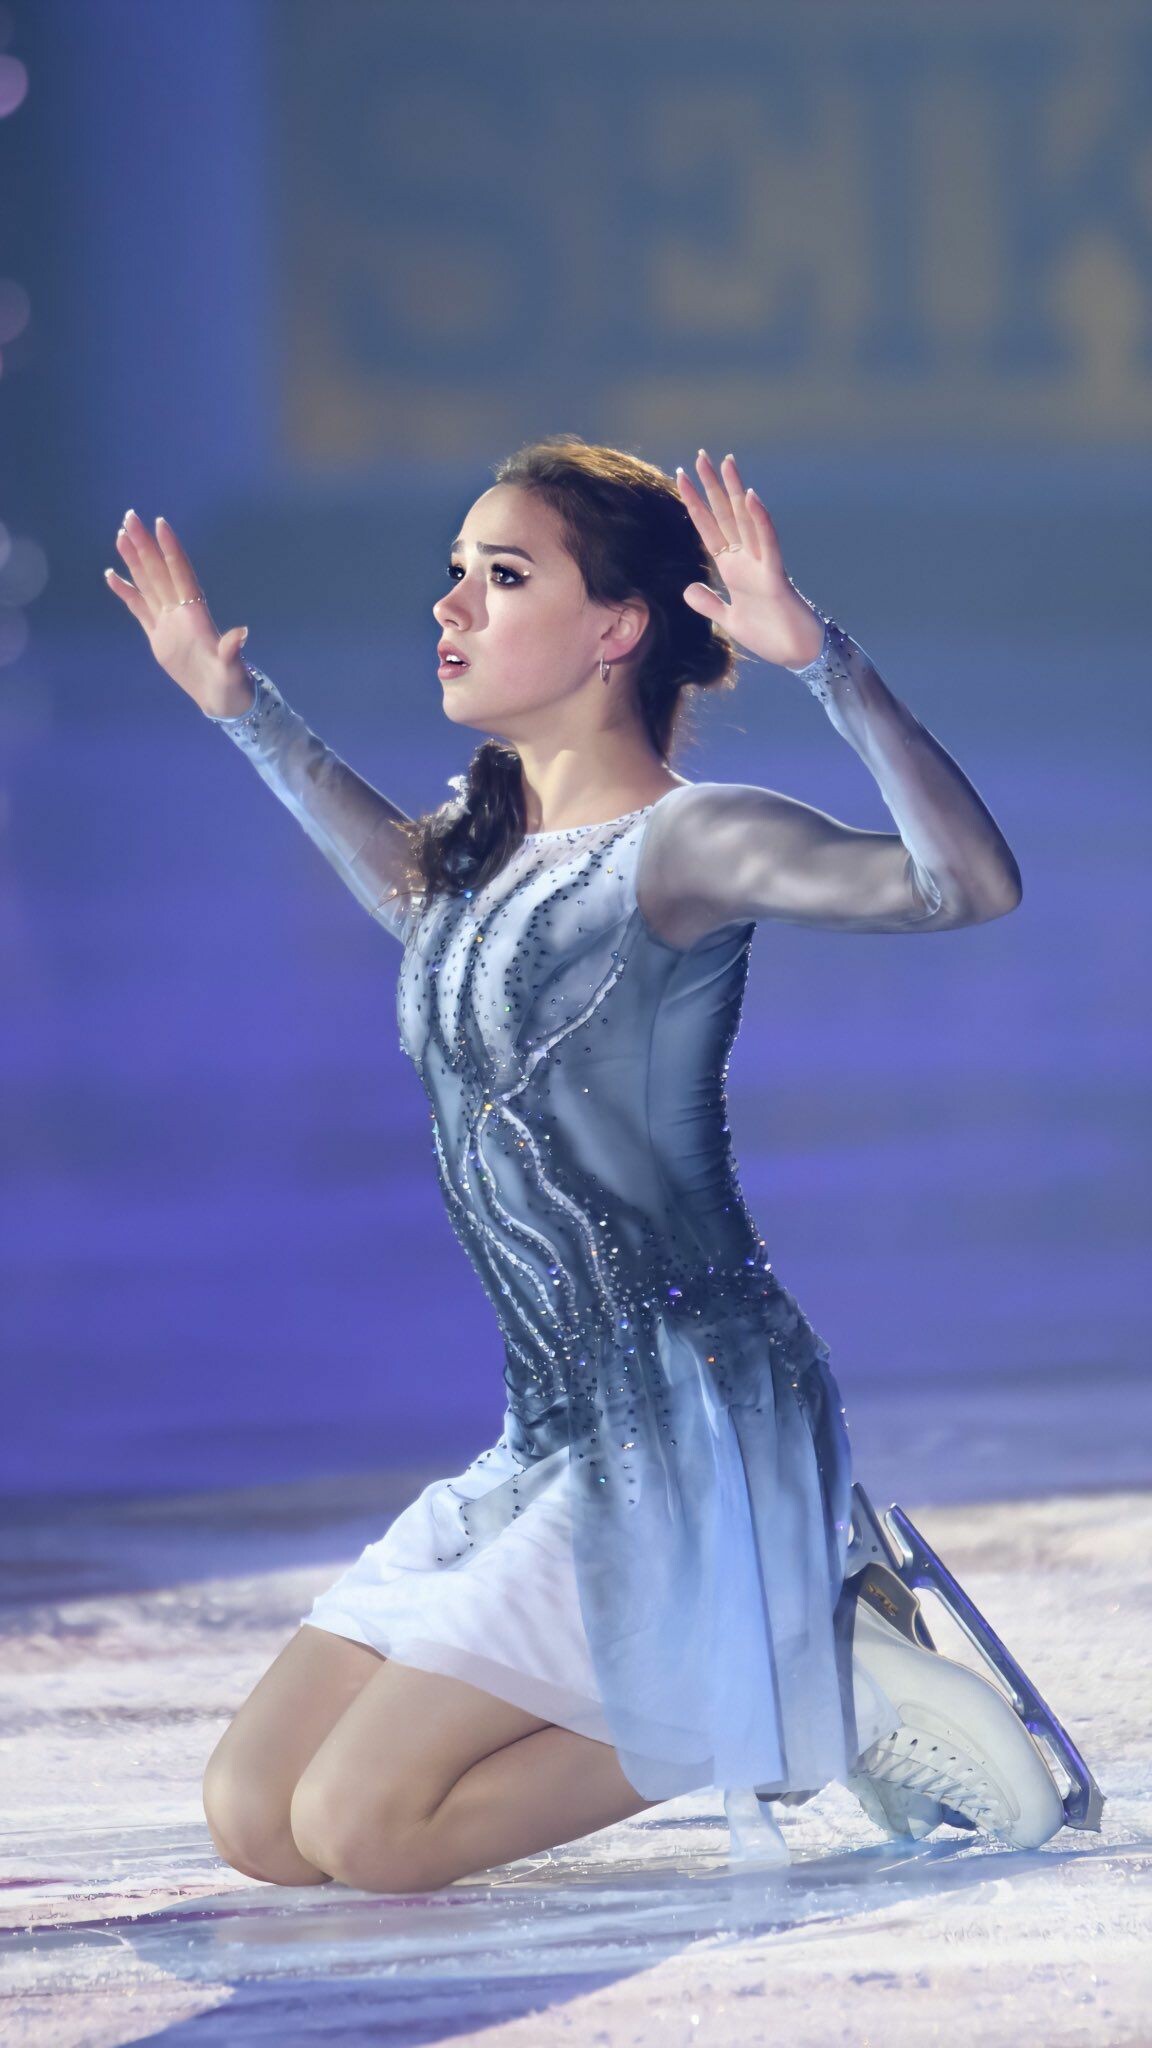 Alina Zagitova: She finished fifth overall at the 2018 World Figure Skating Championships in Milan. 1160x2050 HD Background.